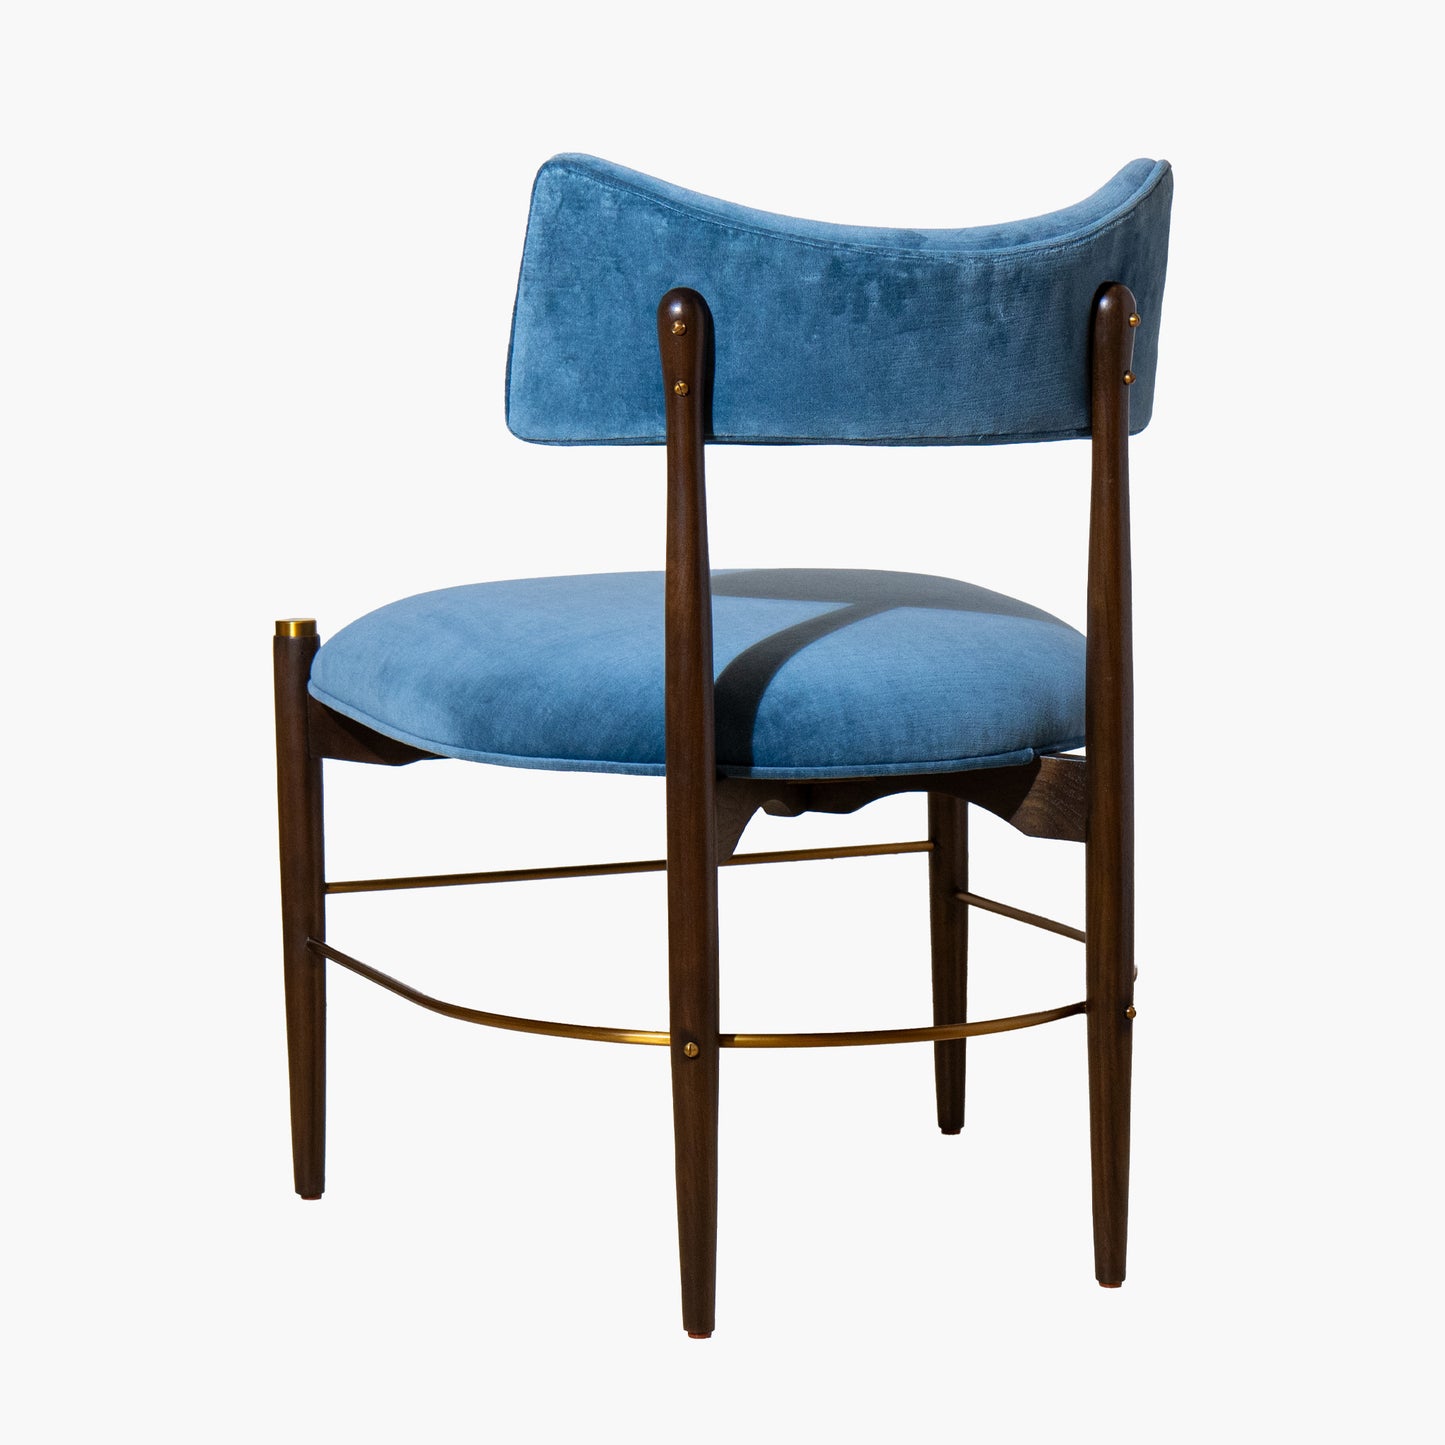 Durrant Side Chair